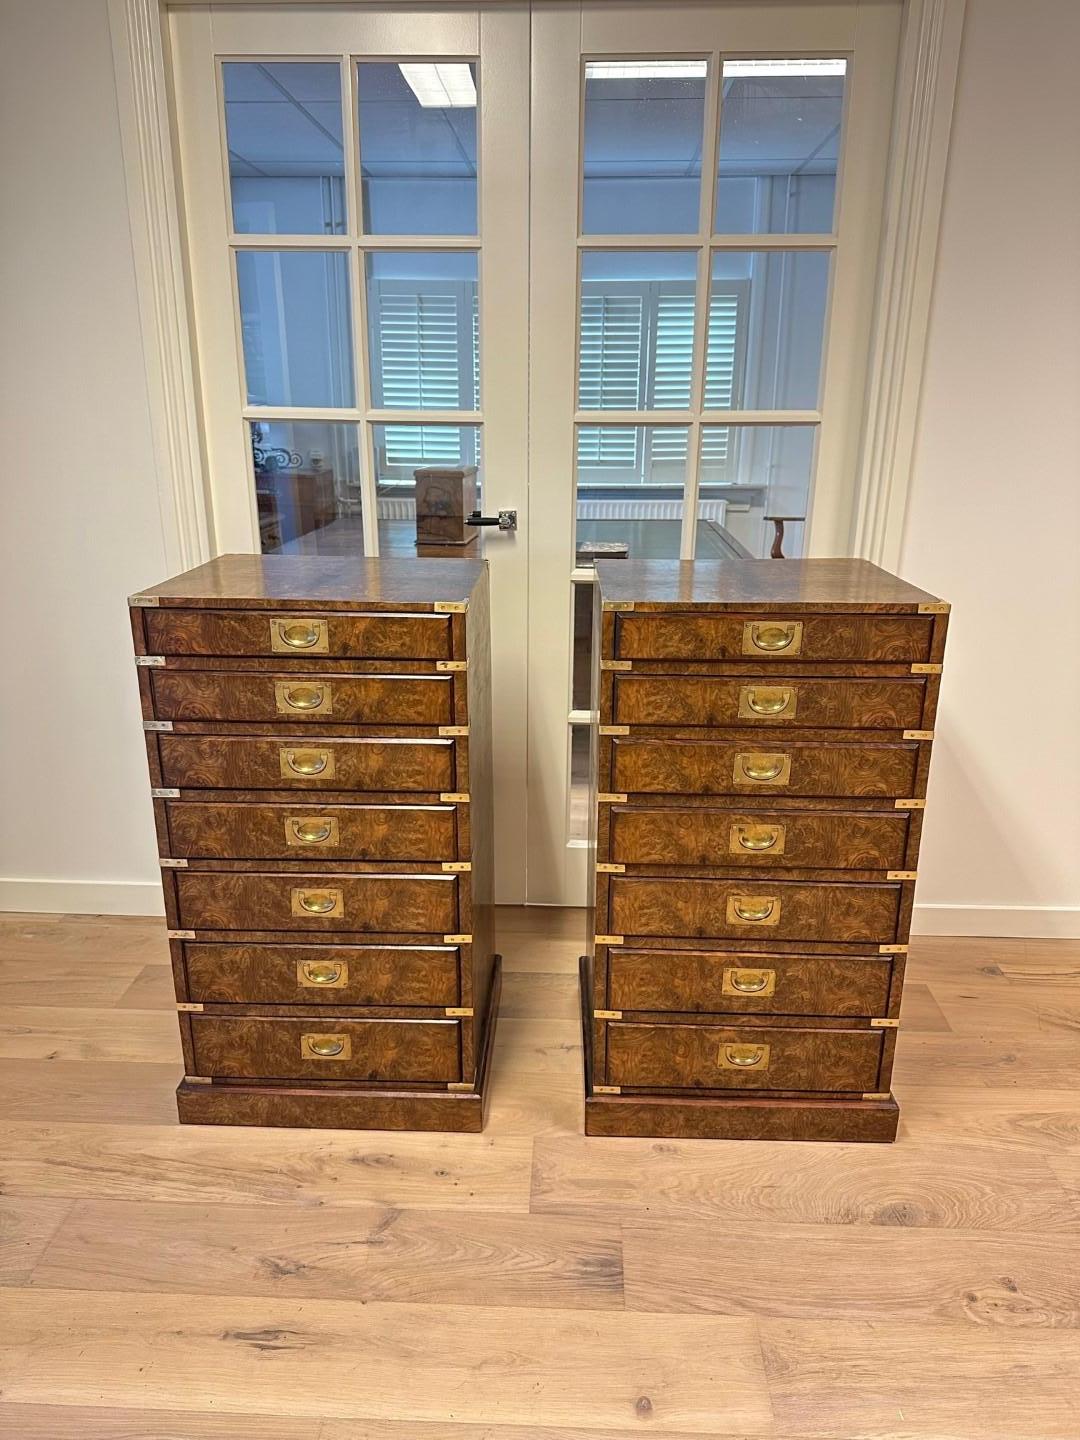 In the world of antique furniture, burr walnut wooden chests of drawers with English Campaign fittings are known as true gems of craftsmanship and timeless elegance. This beautiful set of chests of drawers tells a story of a bygone era, when English